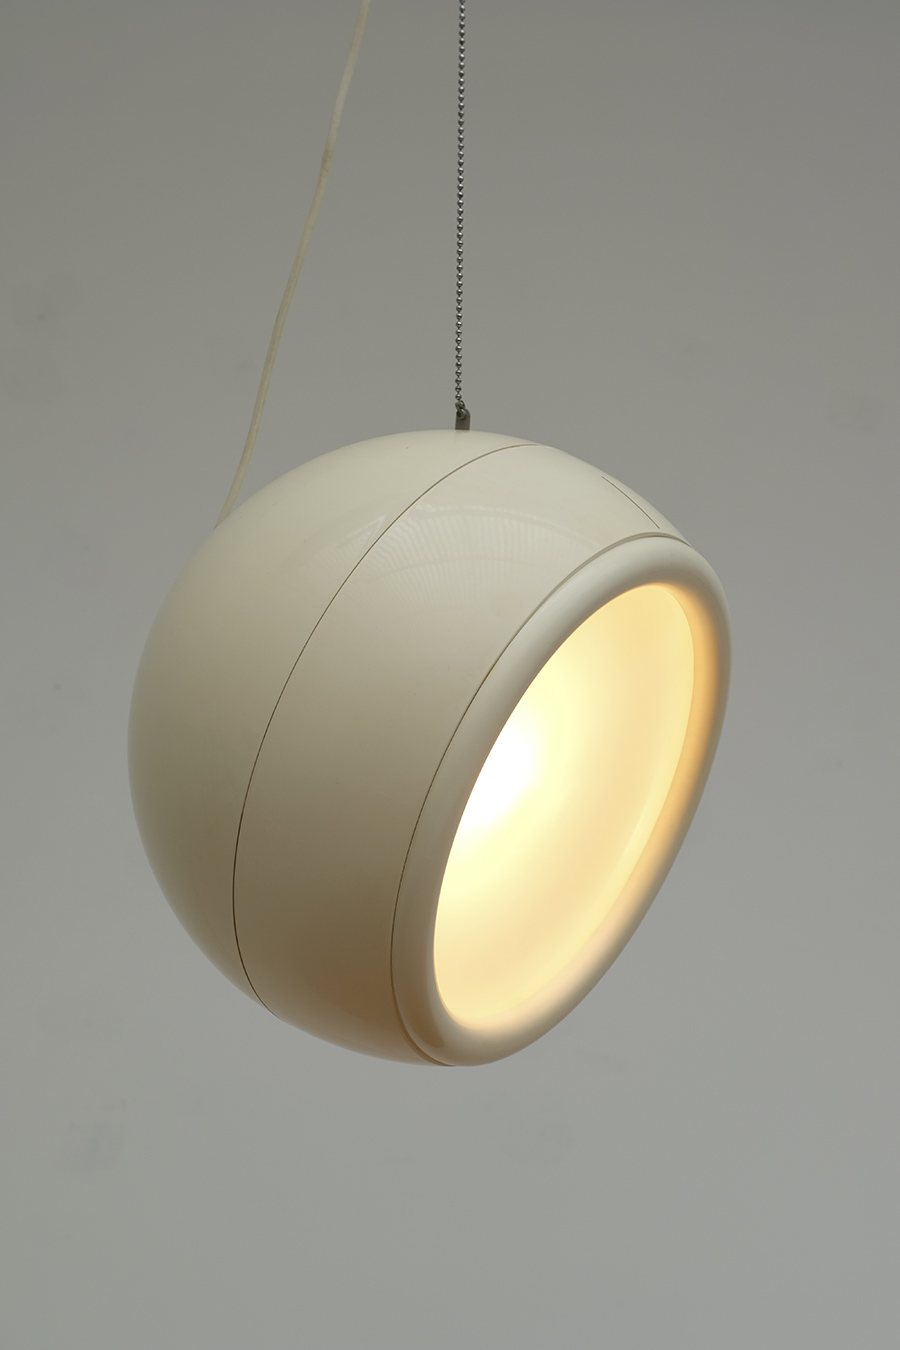 Pallade Lamp by Studio Tetrarch for Artemideimage 11